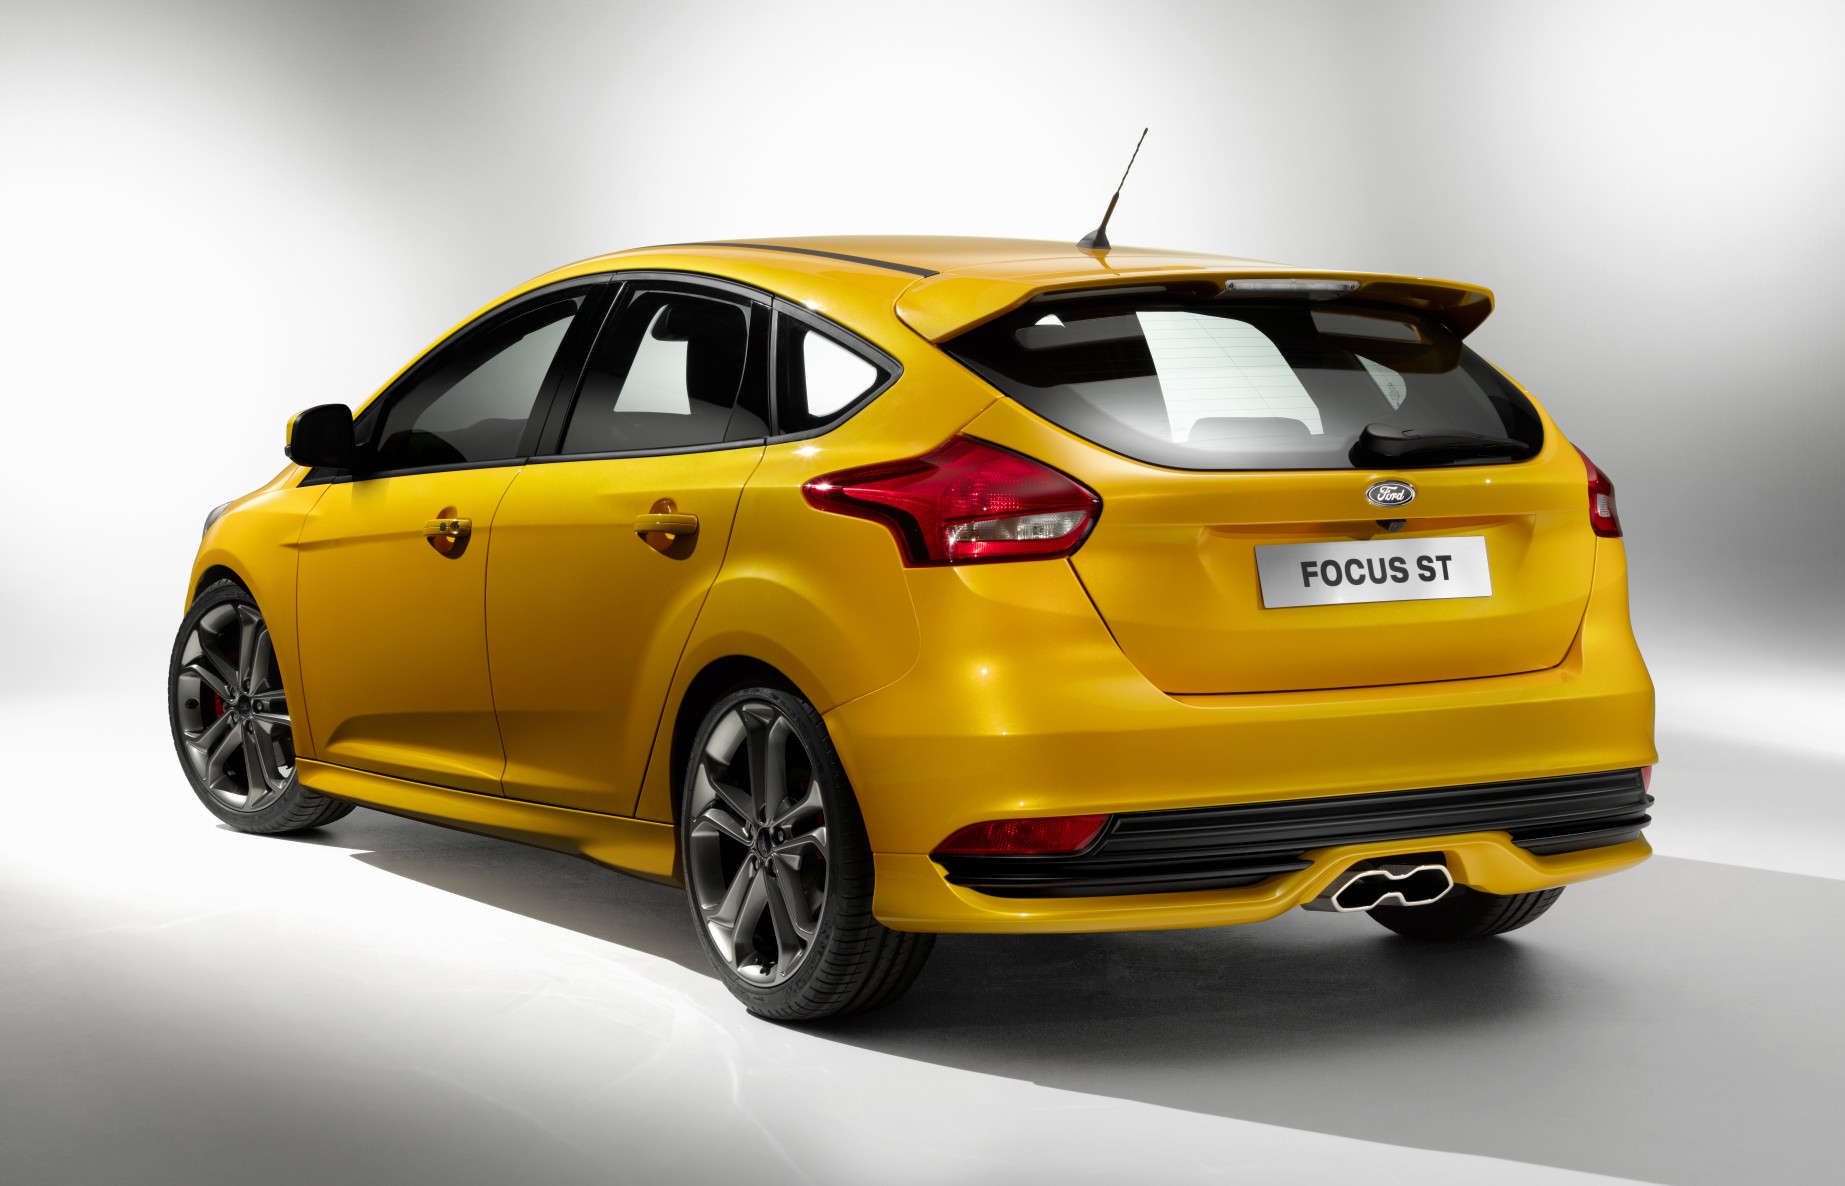 Car of the week: Ford Focus ST